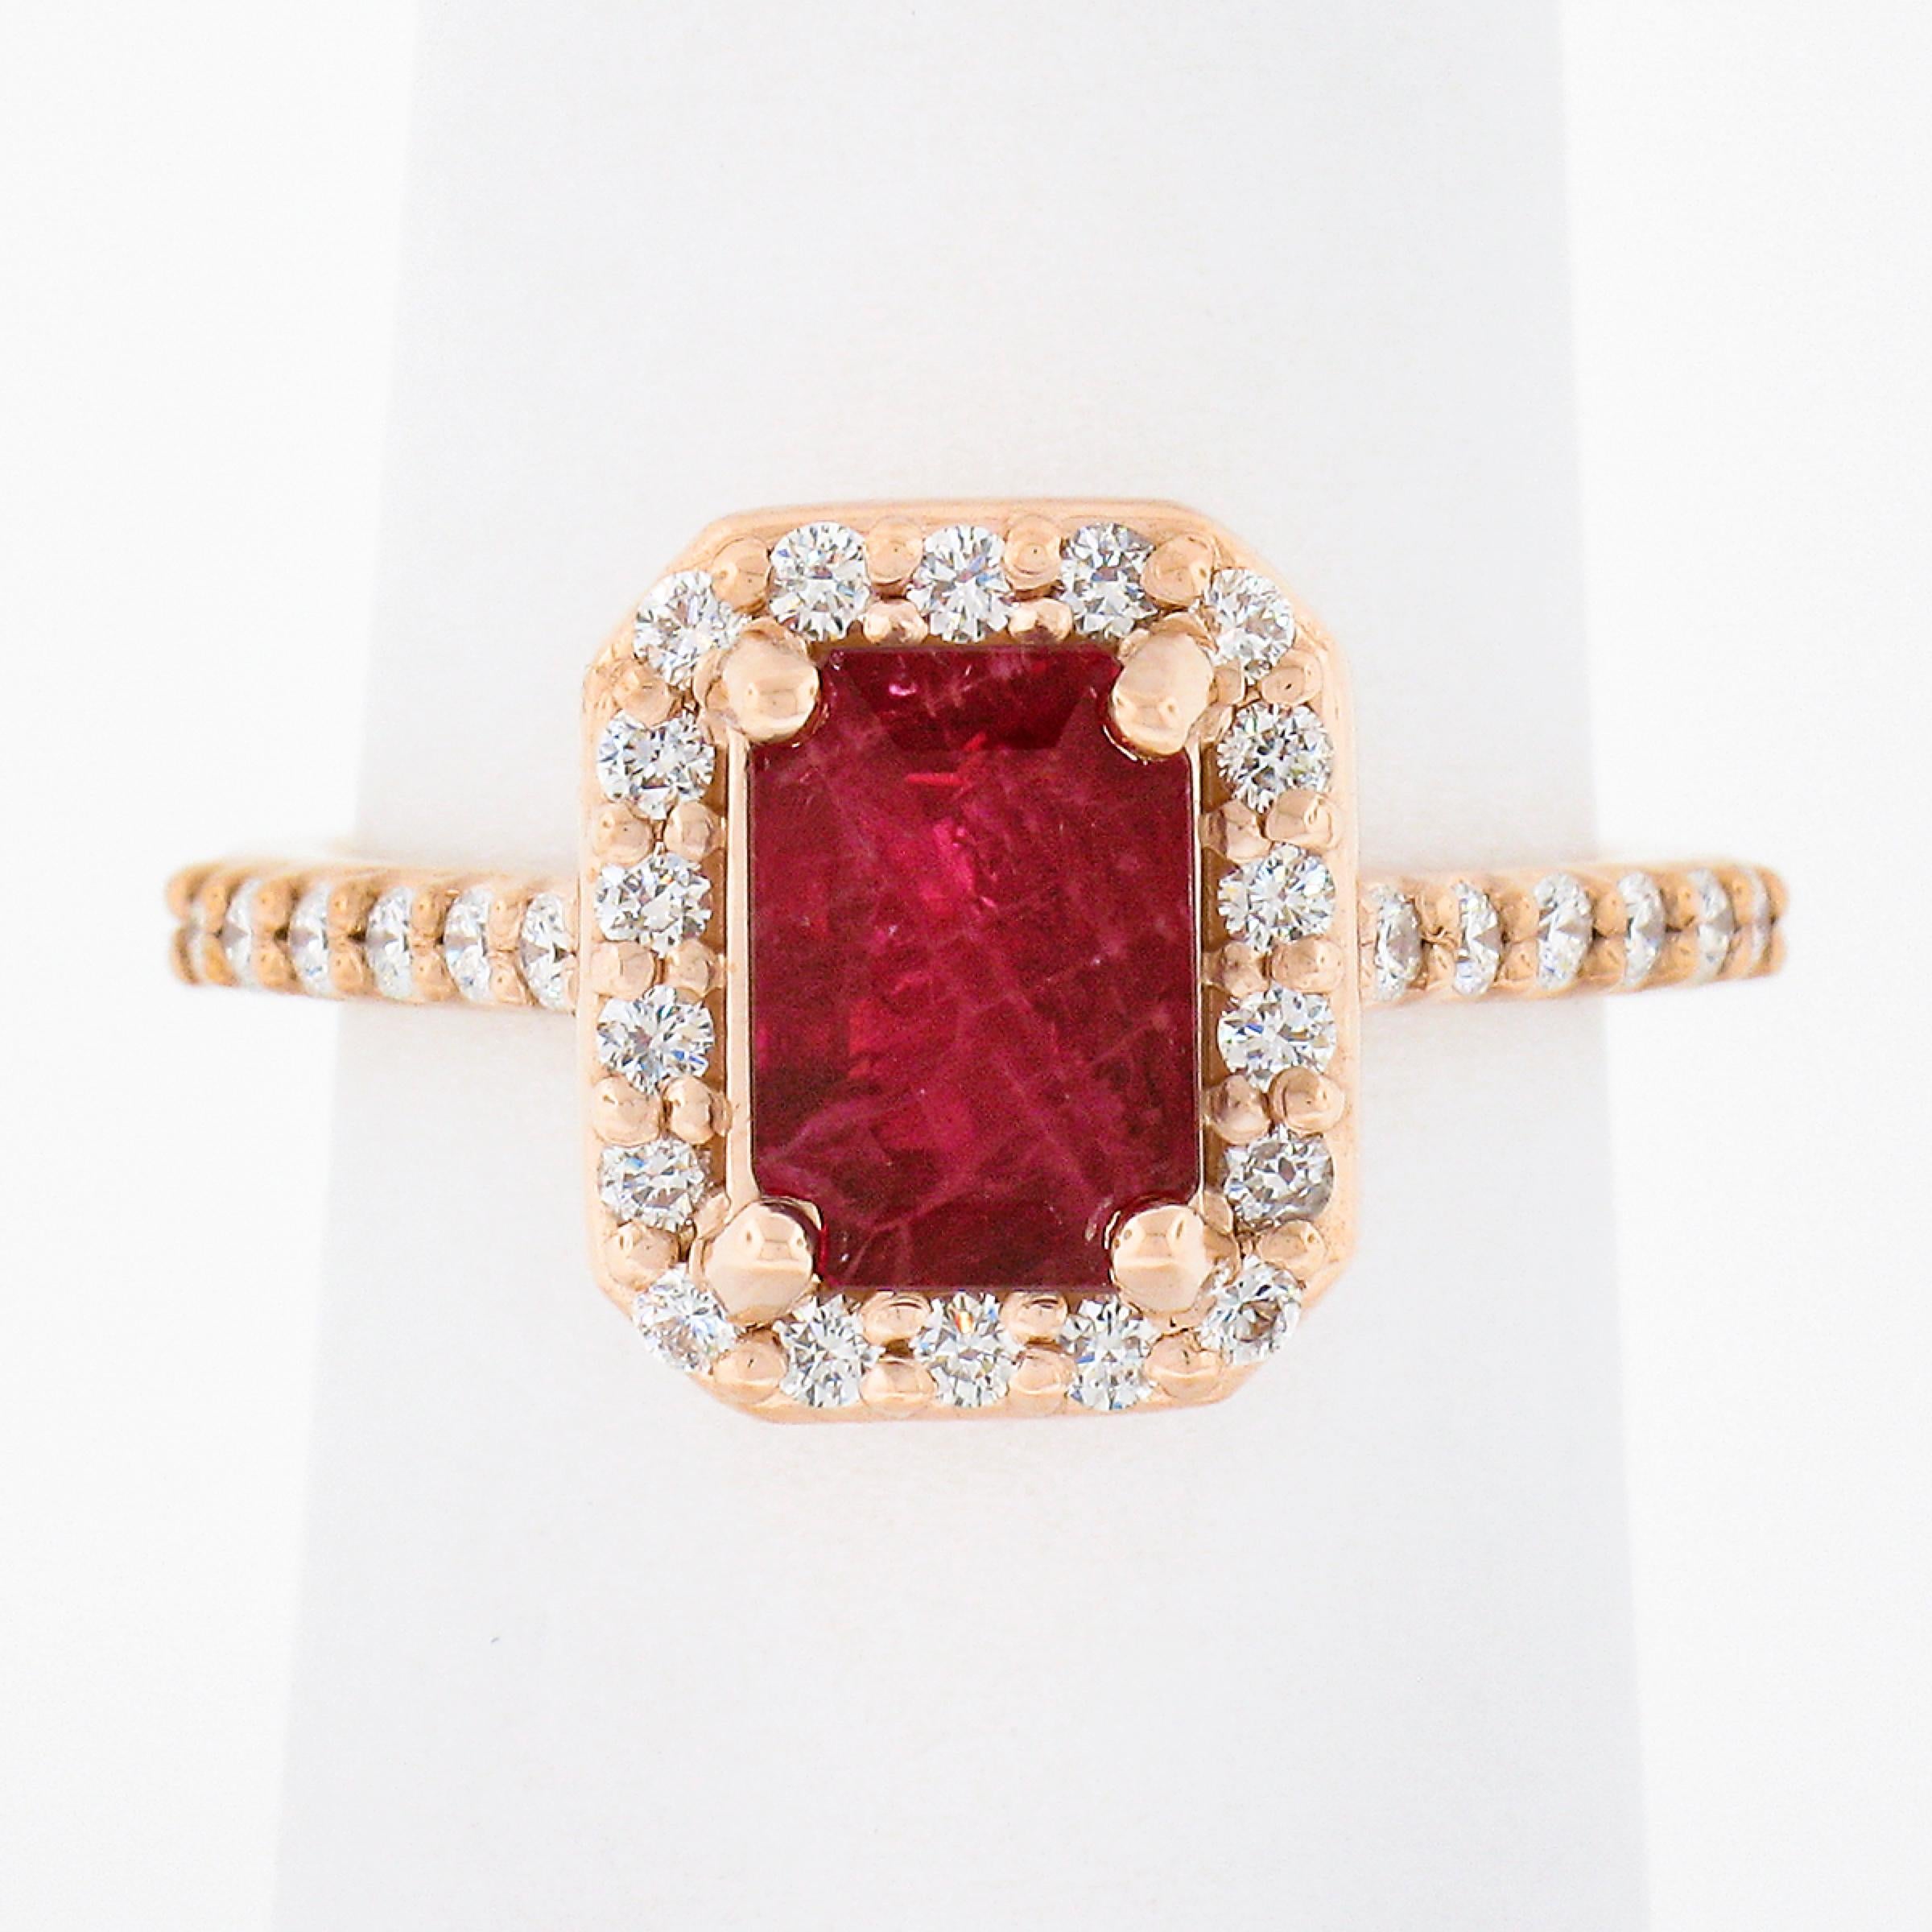 This gorgeous engagement or cocktail style ring is newly crafted in solid 14k rose gold and features a stunning, GIA certified, emerald cut ruby neatly prong set at its center. This center stone is certified as weighing exactly 1.96 carats and